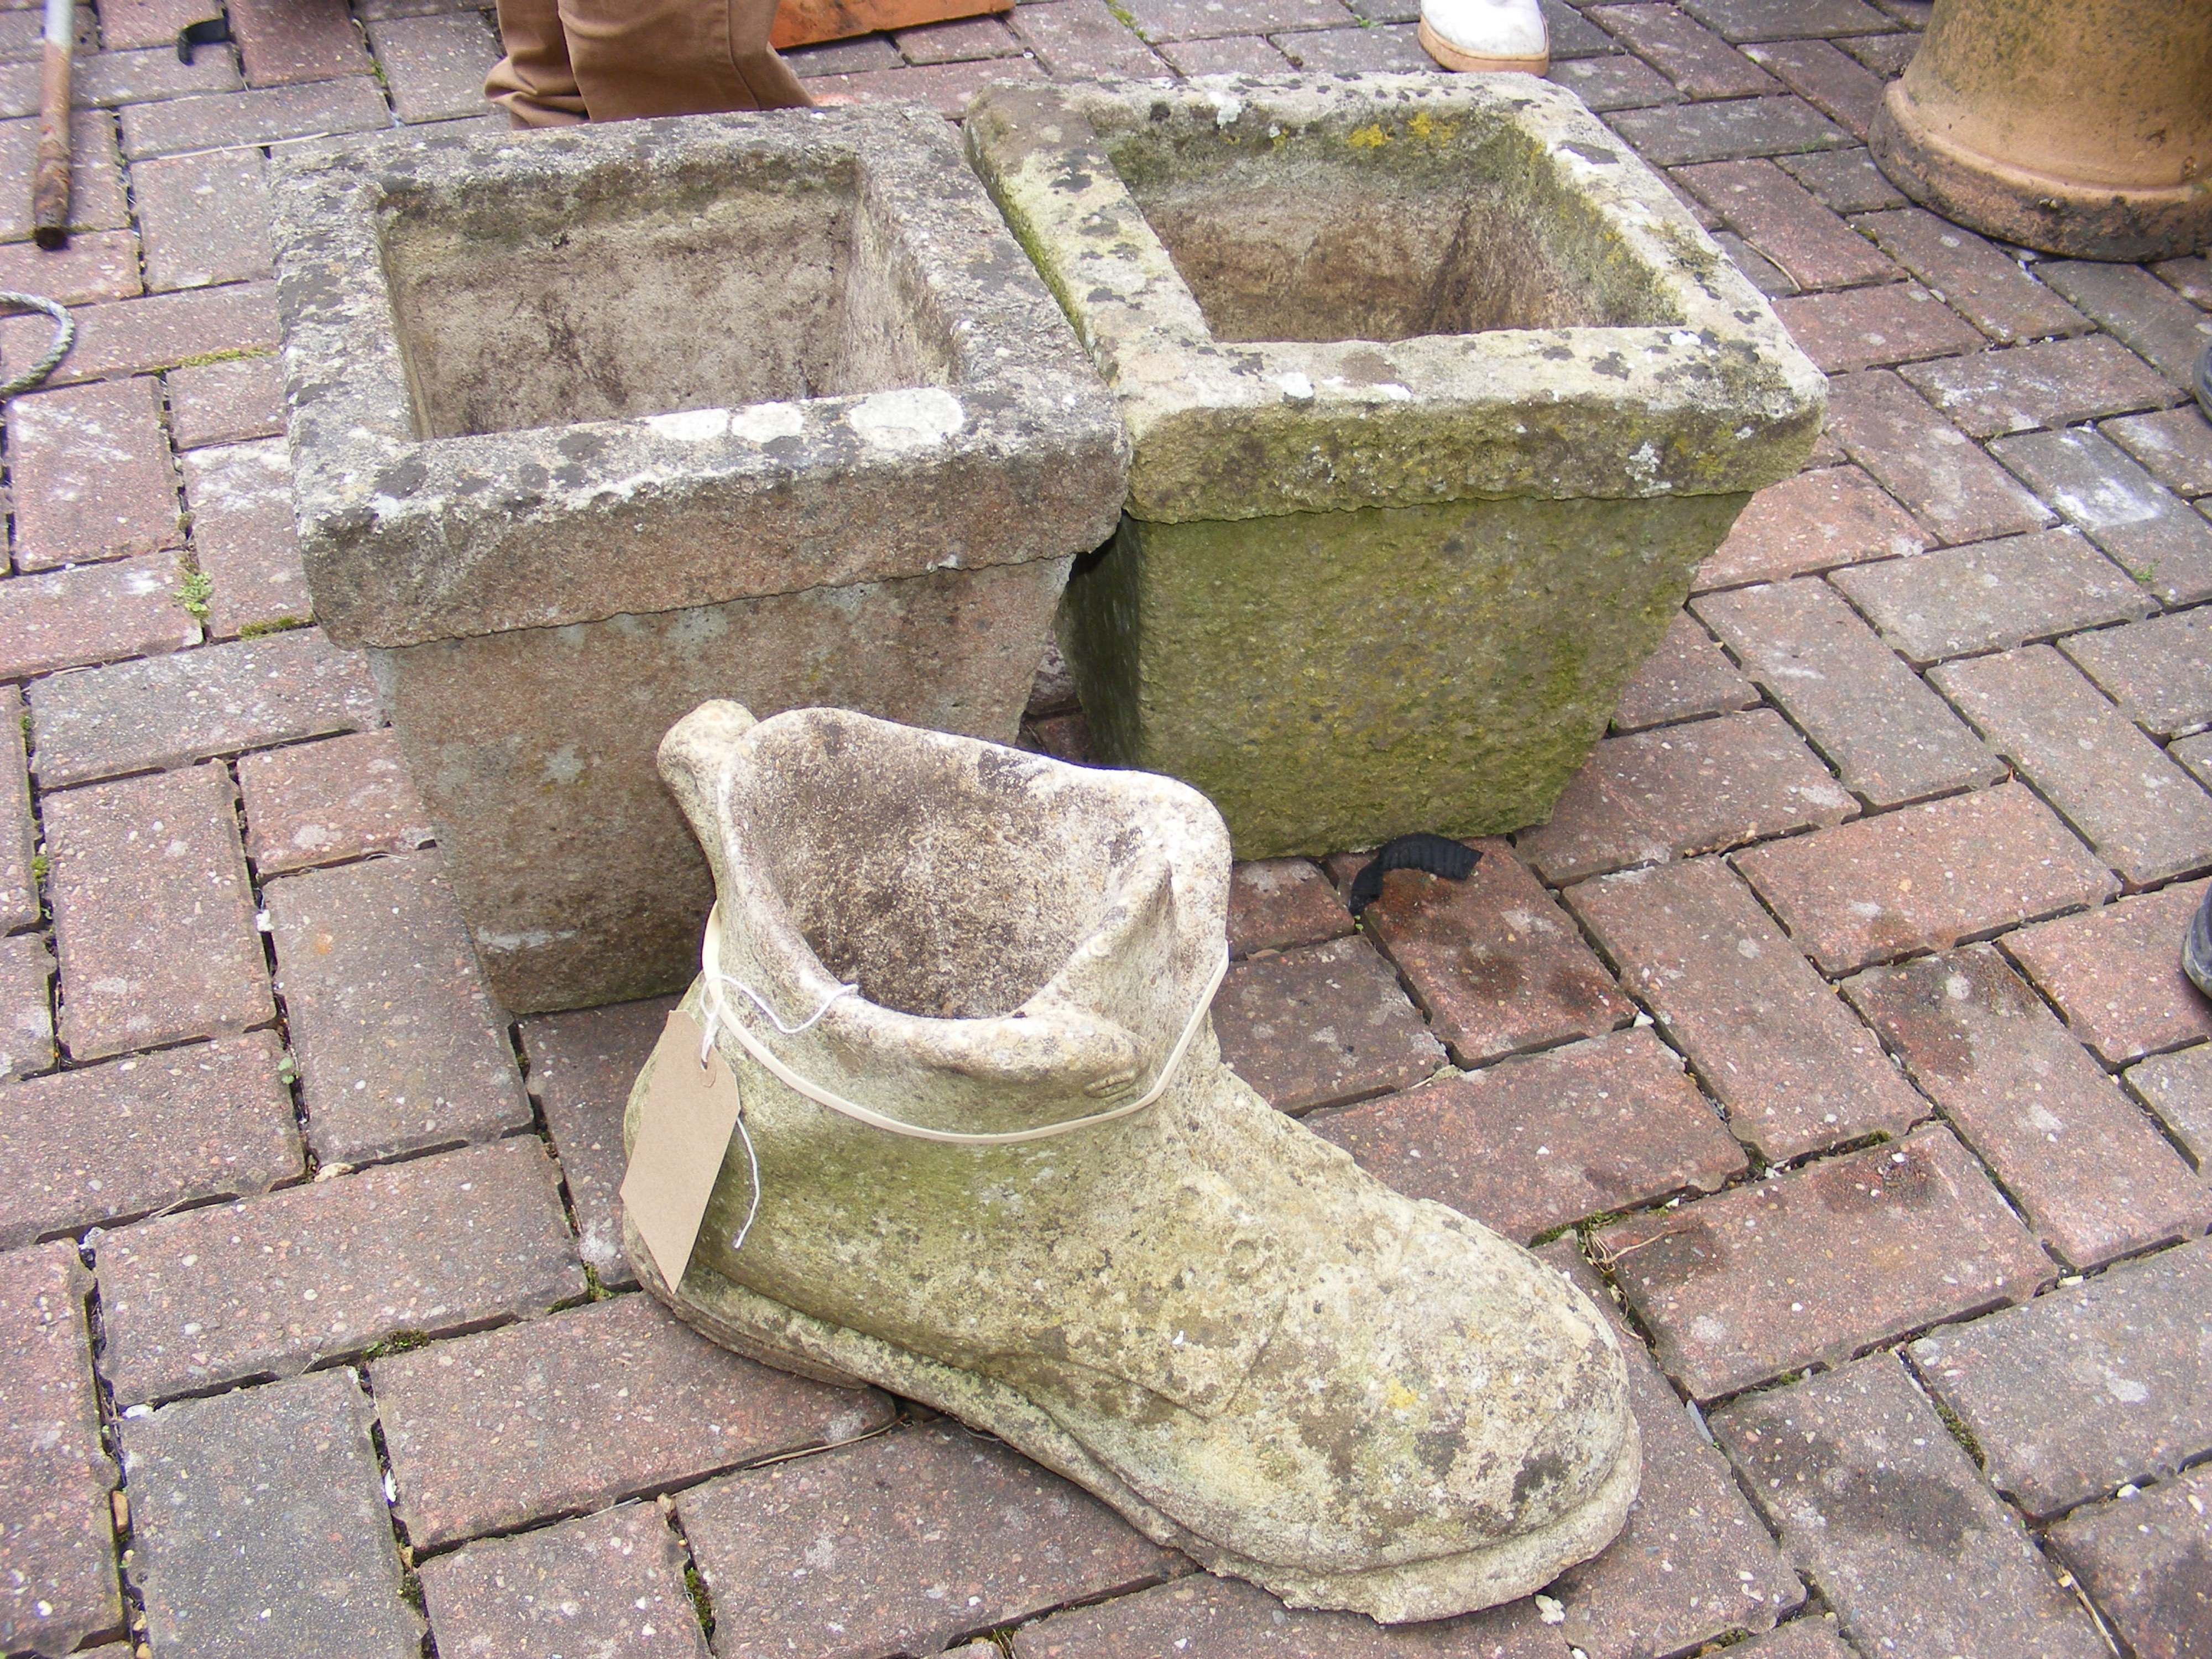 Two square garden planters and an ornamental boot